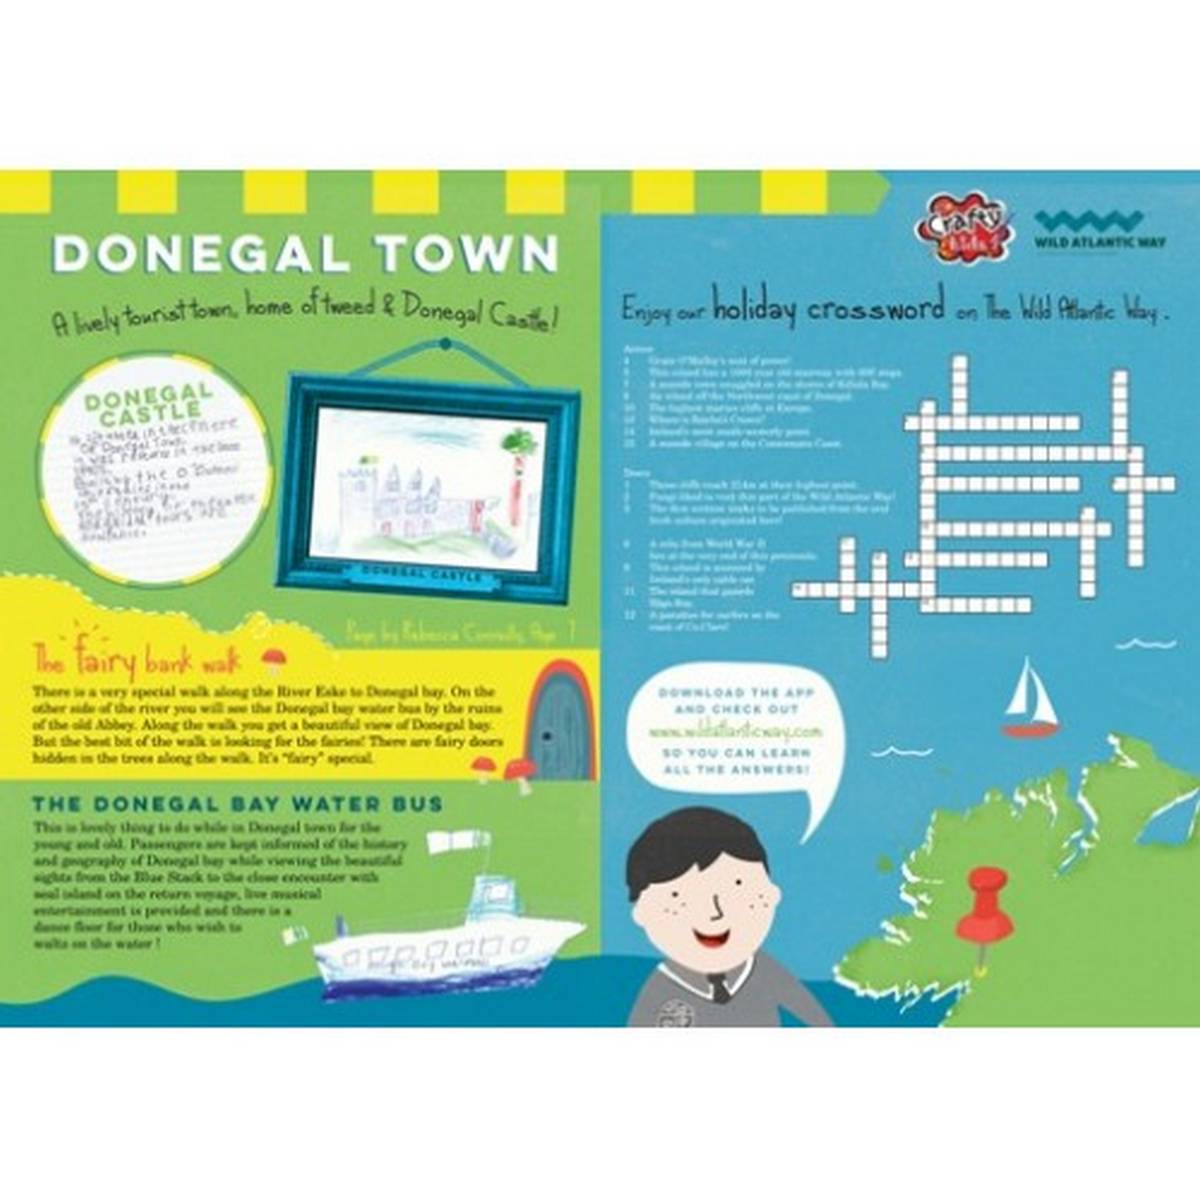 The Crafty Kids Guide to Donegal and its Wild Atlantic Way